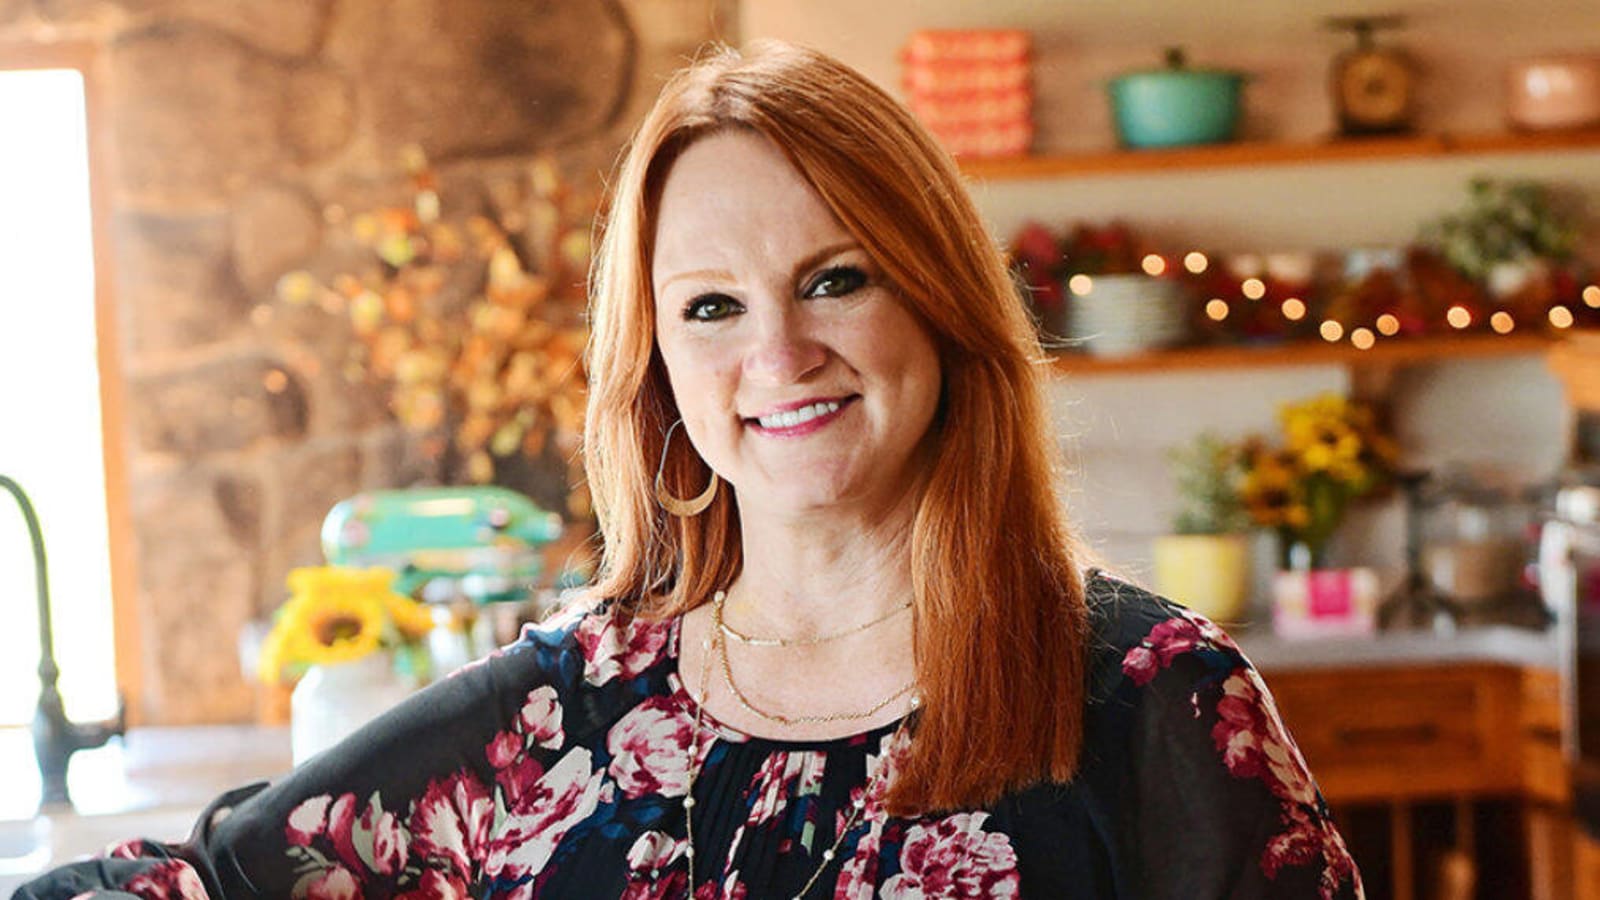 ‘Pioneer Woman’ Ree Drummond Has Surprising Link to Martin Scorsese’s ‘Killers of the Flower Moon’